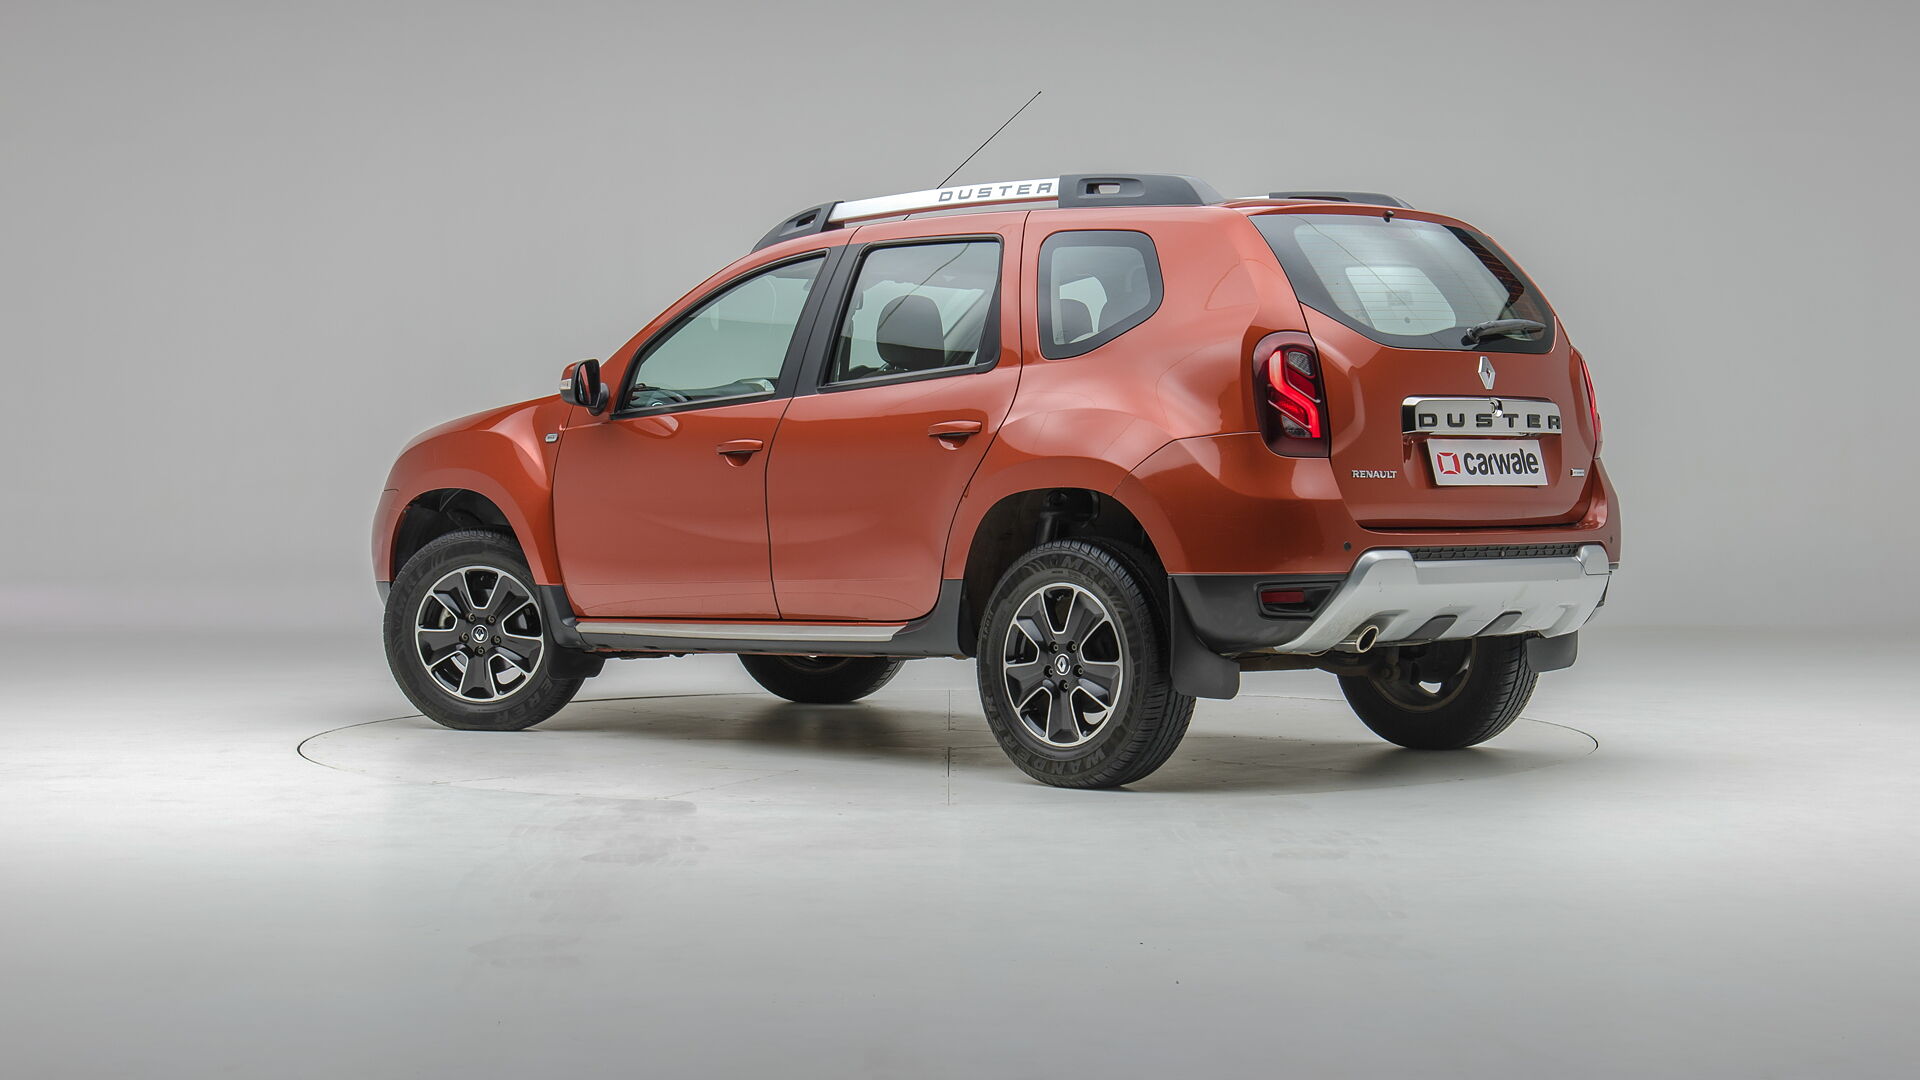 Renault Duster Price, Images, Mileage, Reviews, Specs